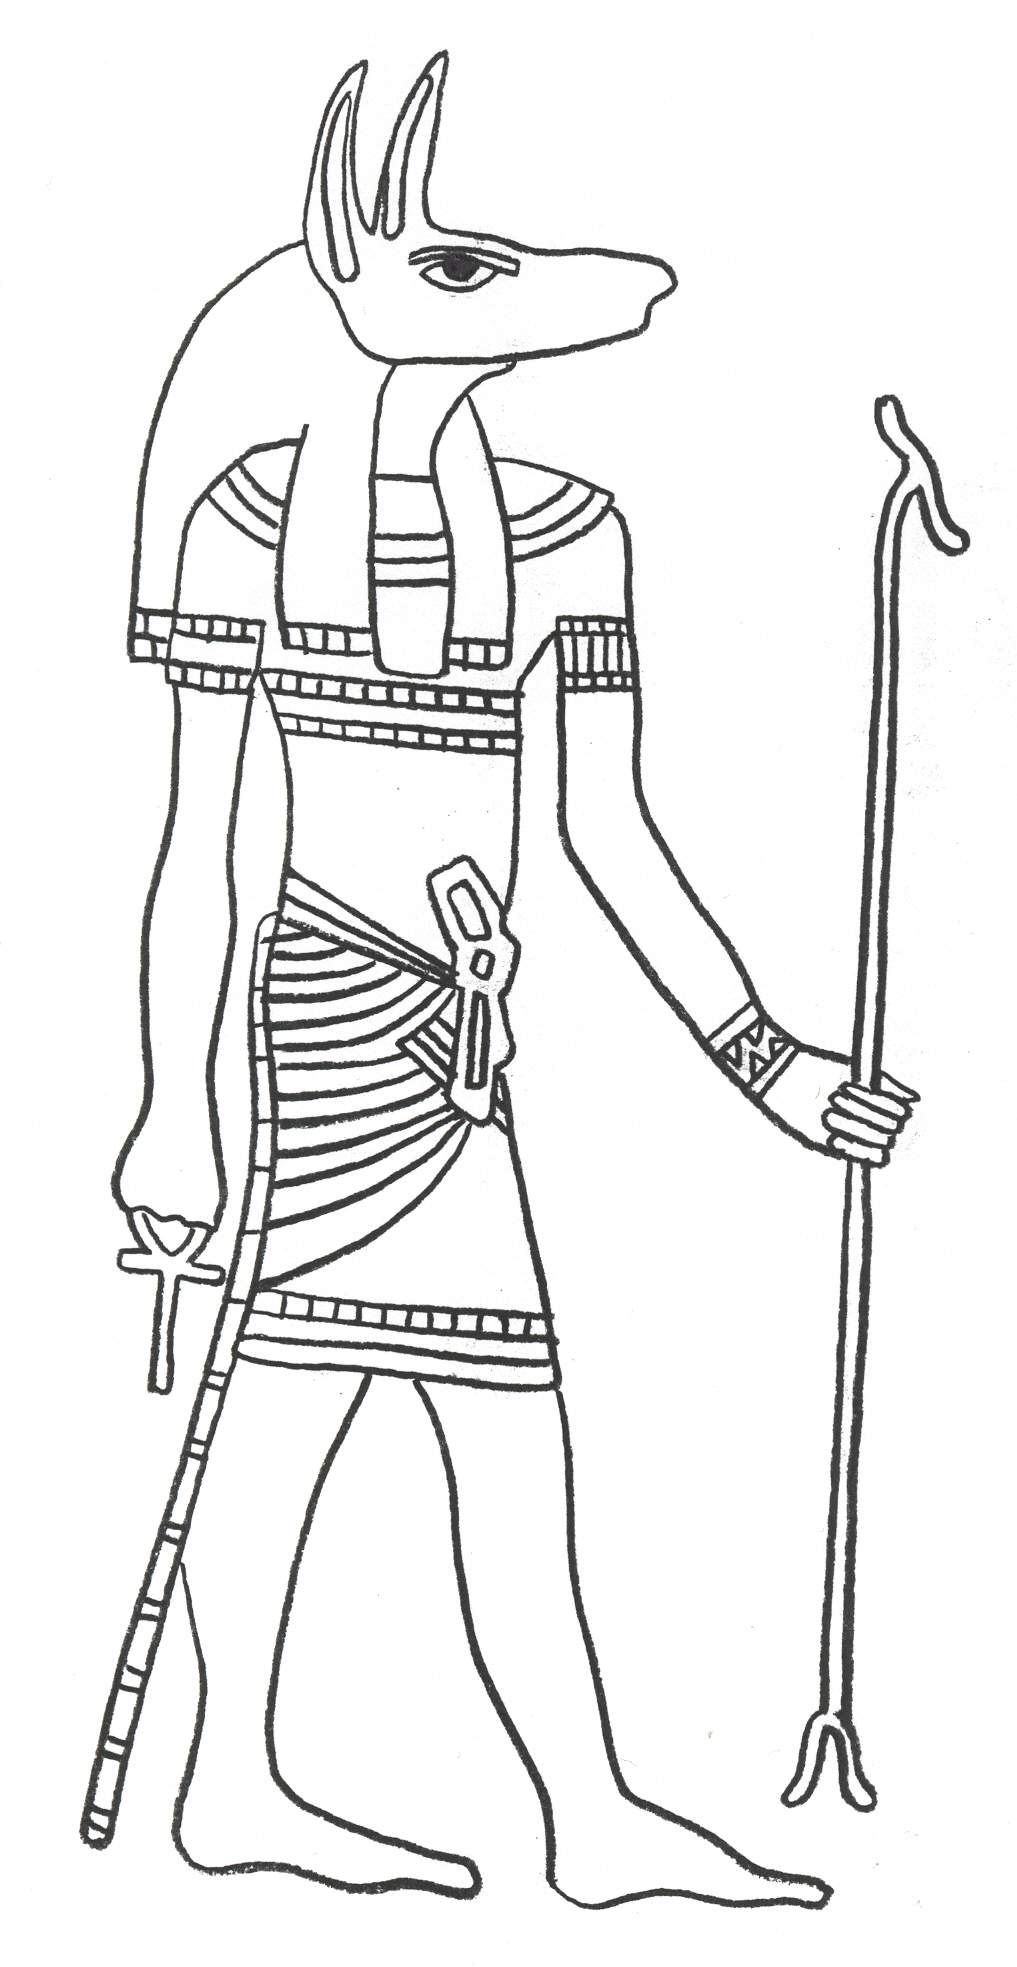 drawings to trace ancient egypt - Clip Art Library